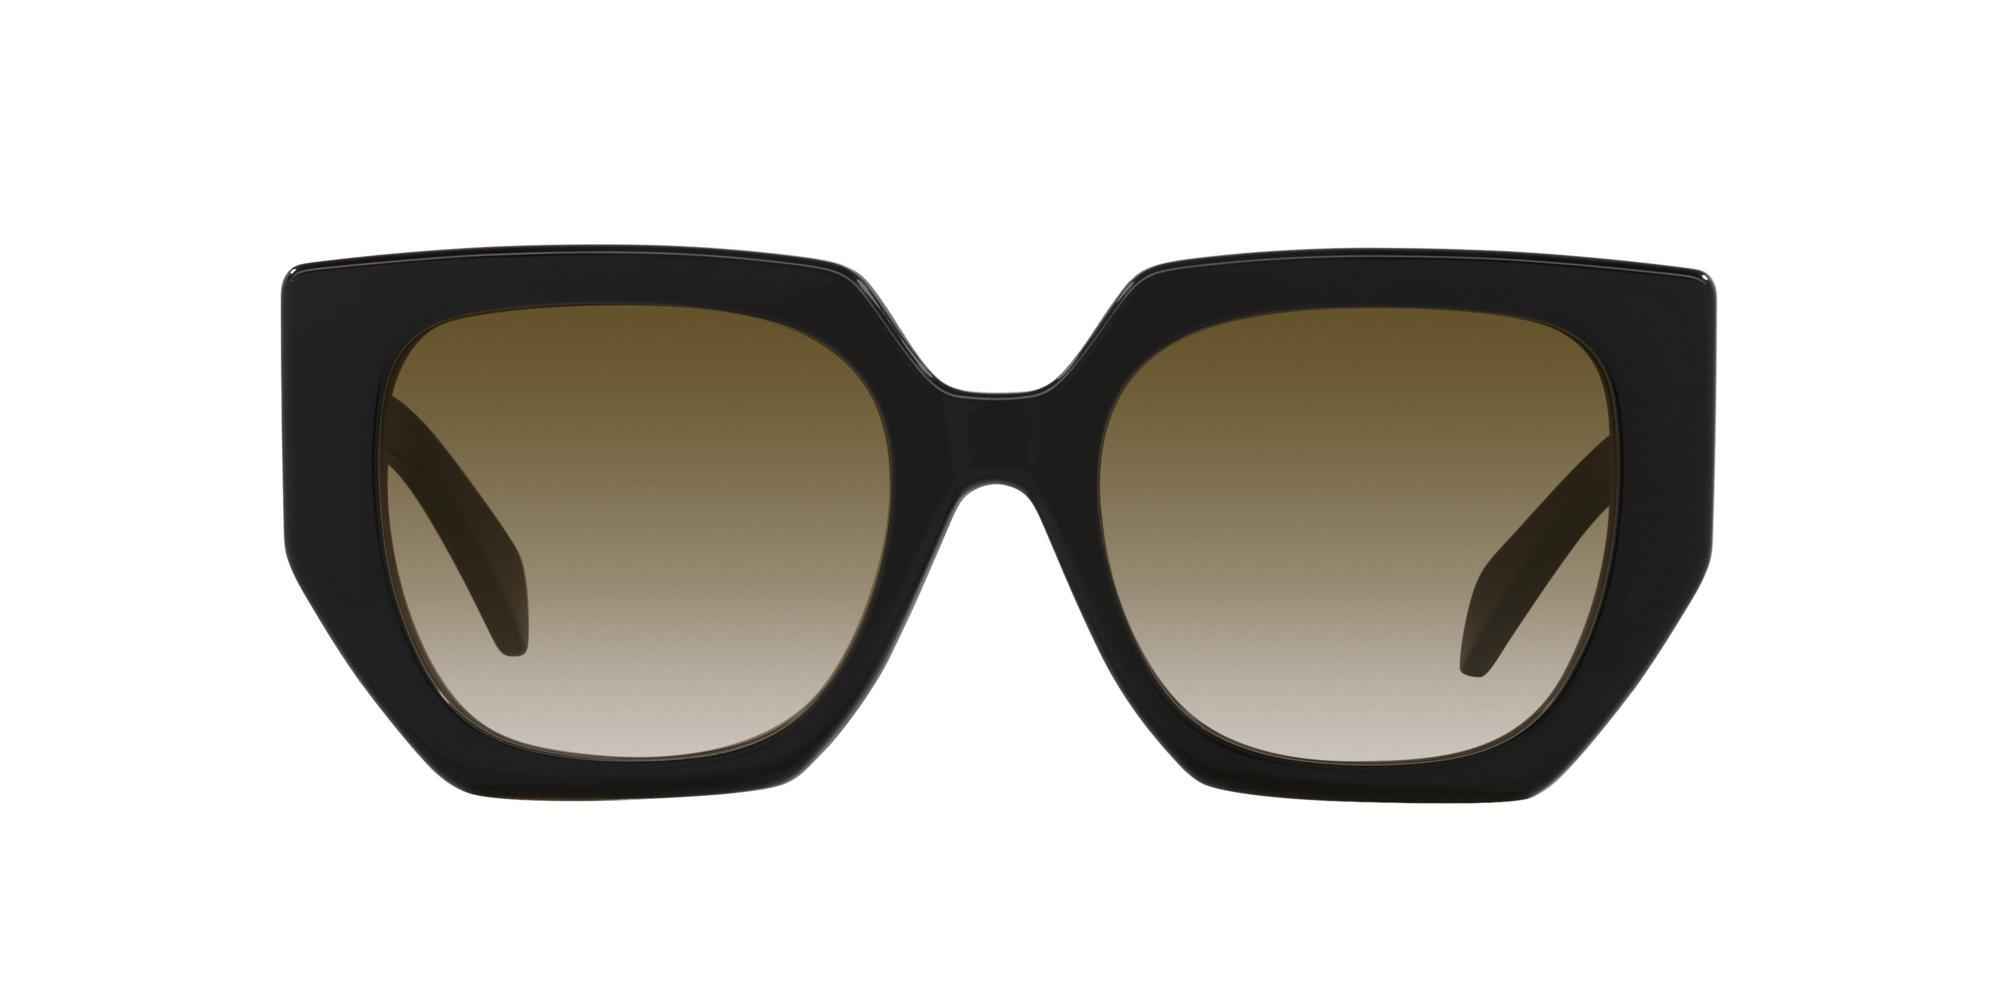 CELINE Triomphe 55mm Butterfly Sunglasses Product Image